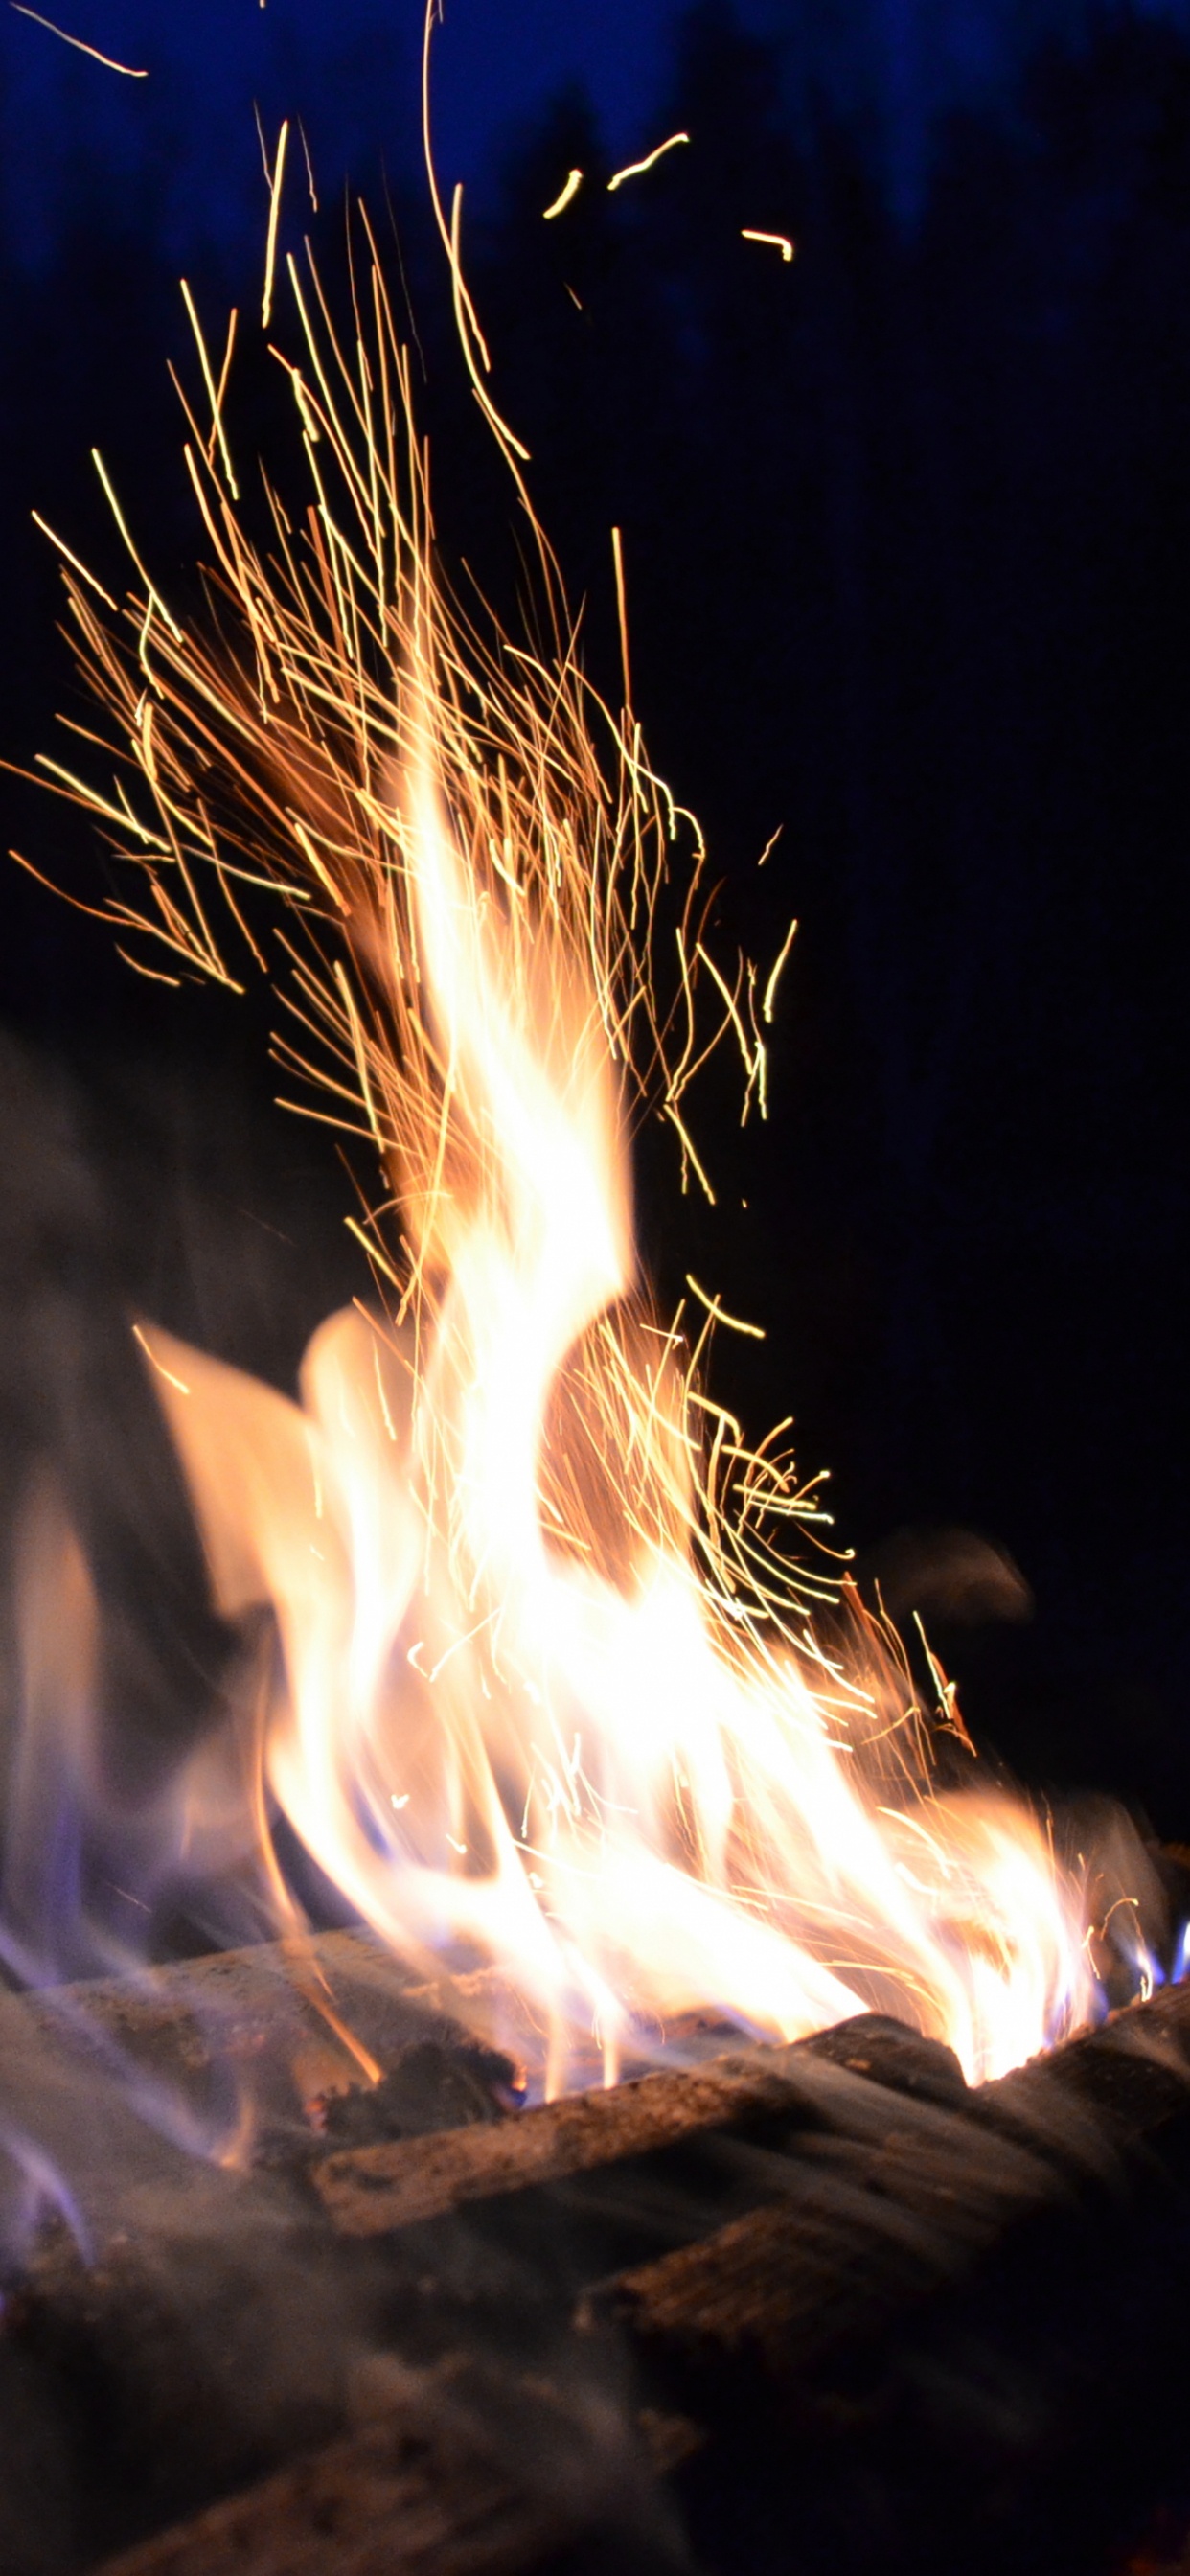 Time Lapse Photography of Fire. Wallpaper in 1242x2688 Resolution